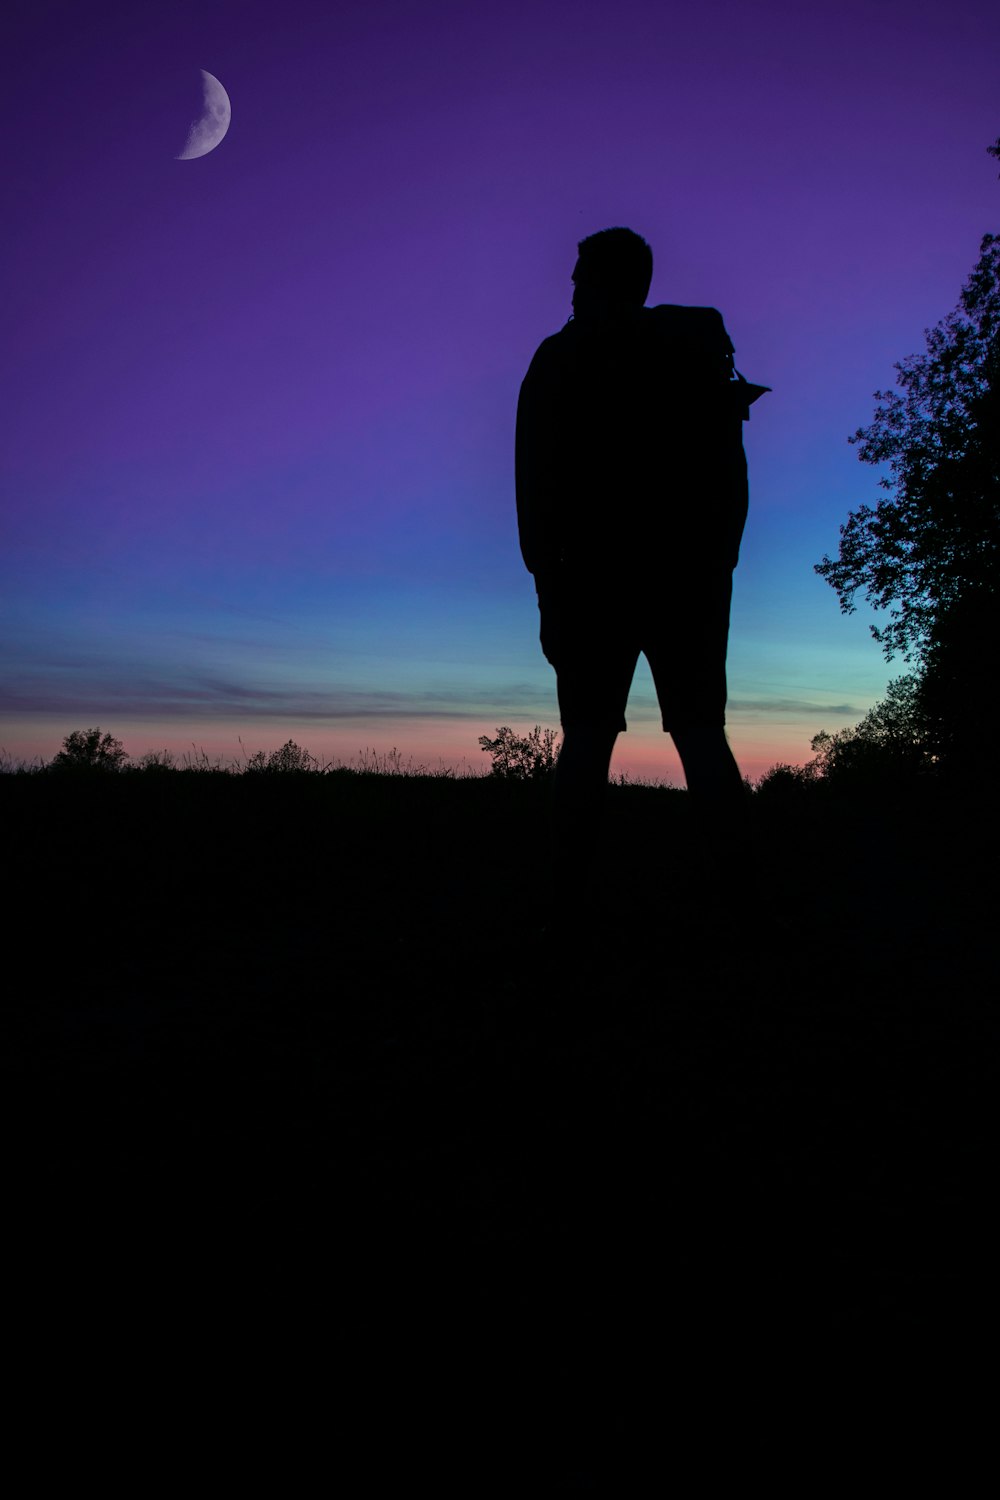 silhouette of person on grass